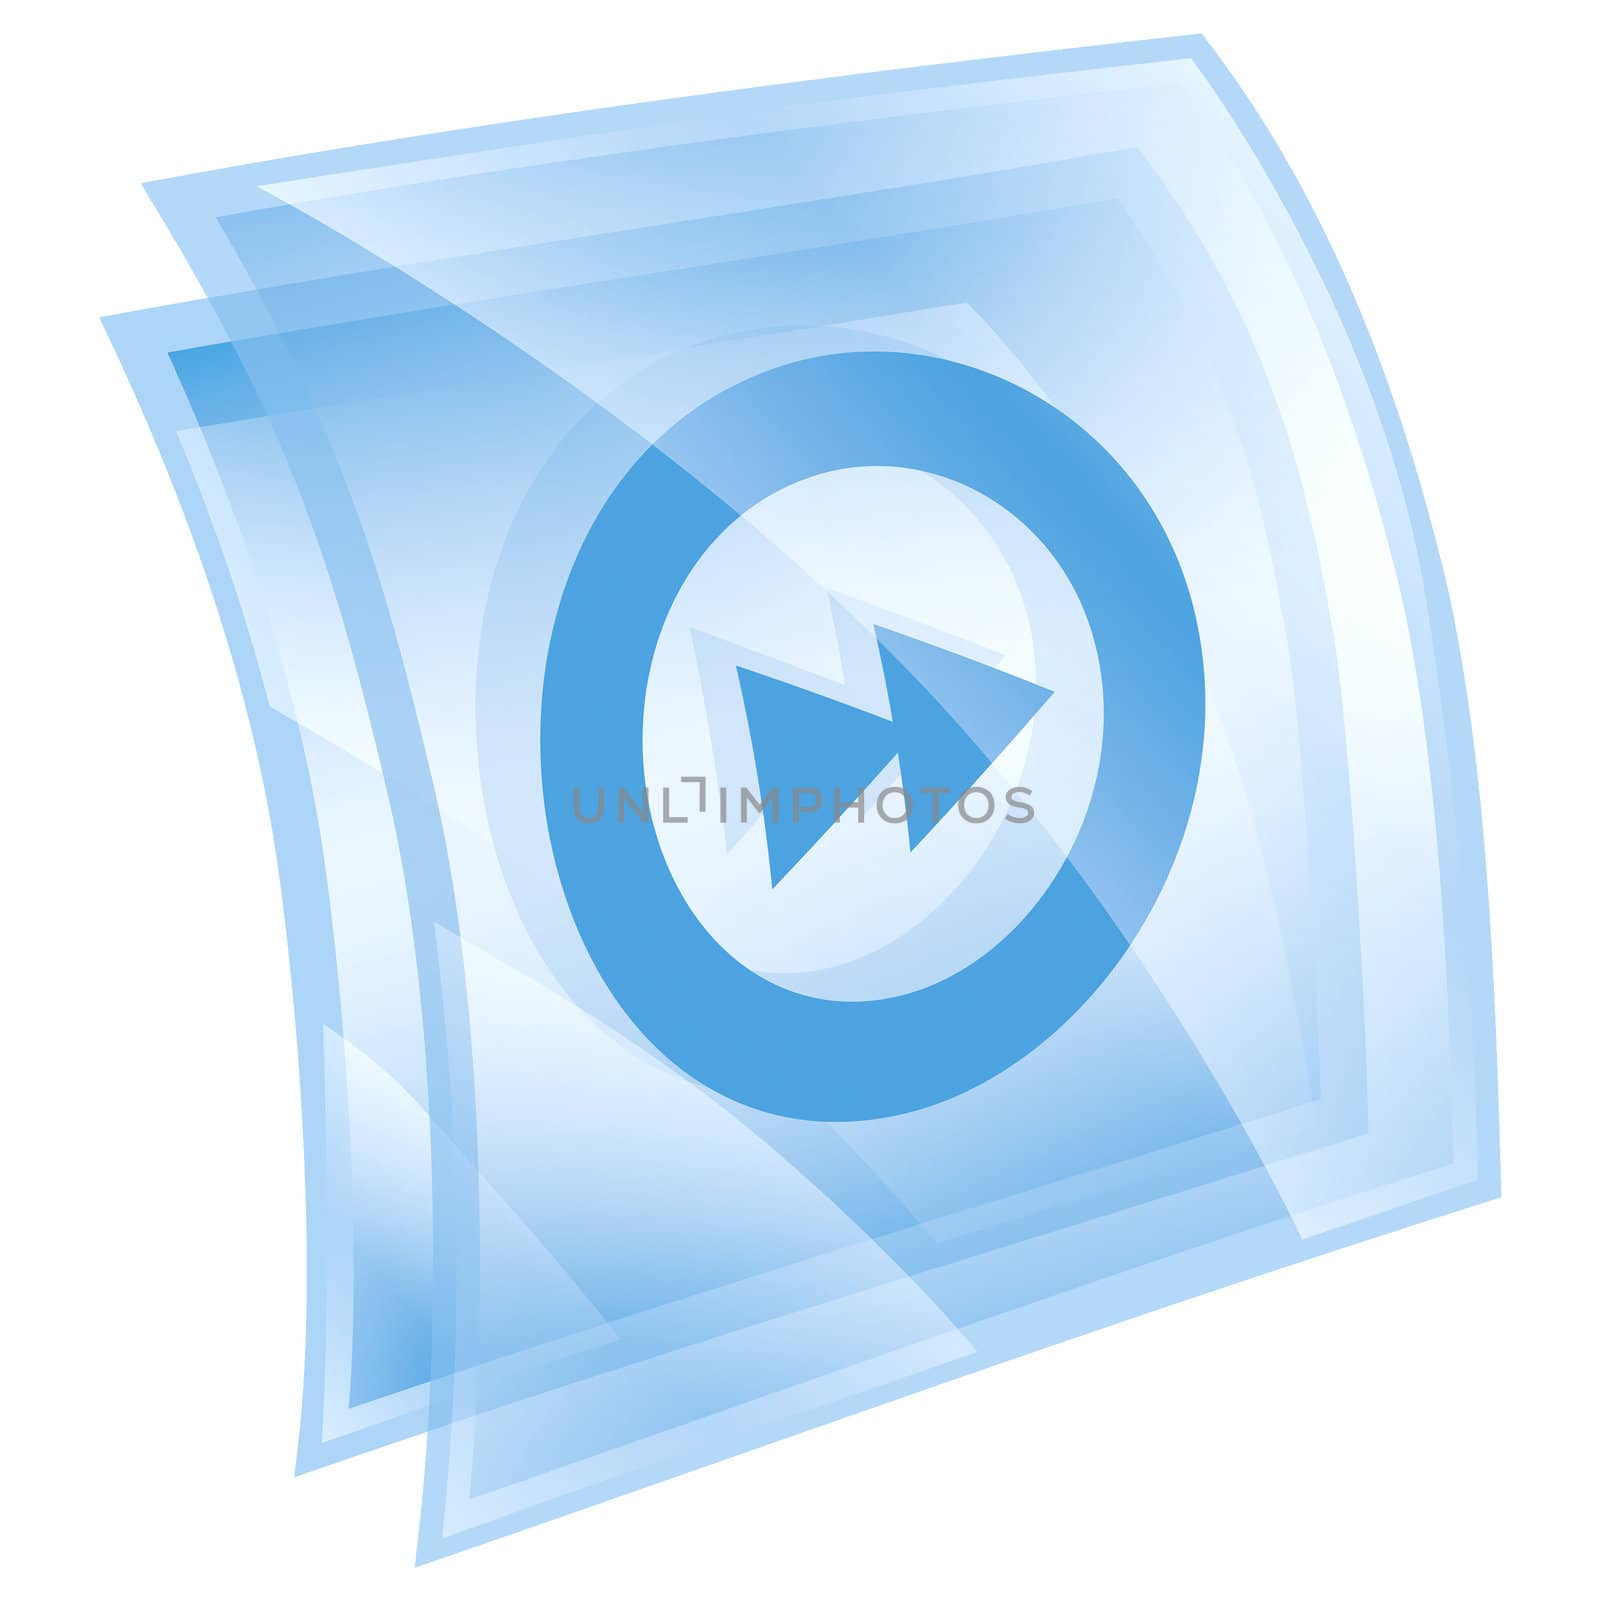 Rewind Forward icon blue, isolated on white background. by zeffss